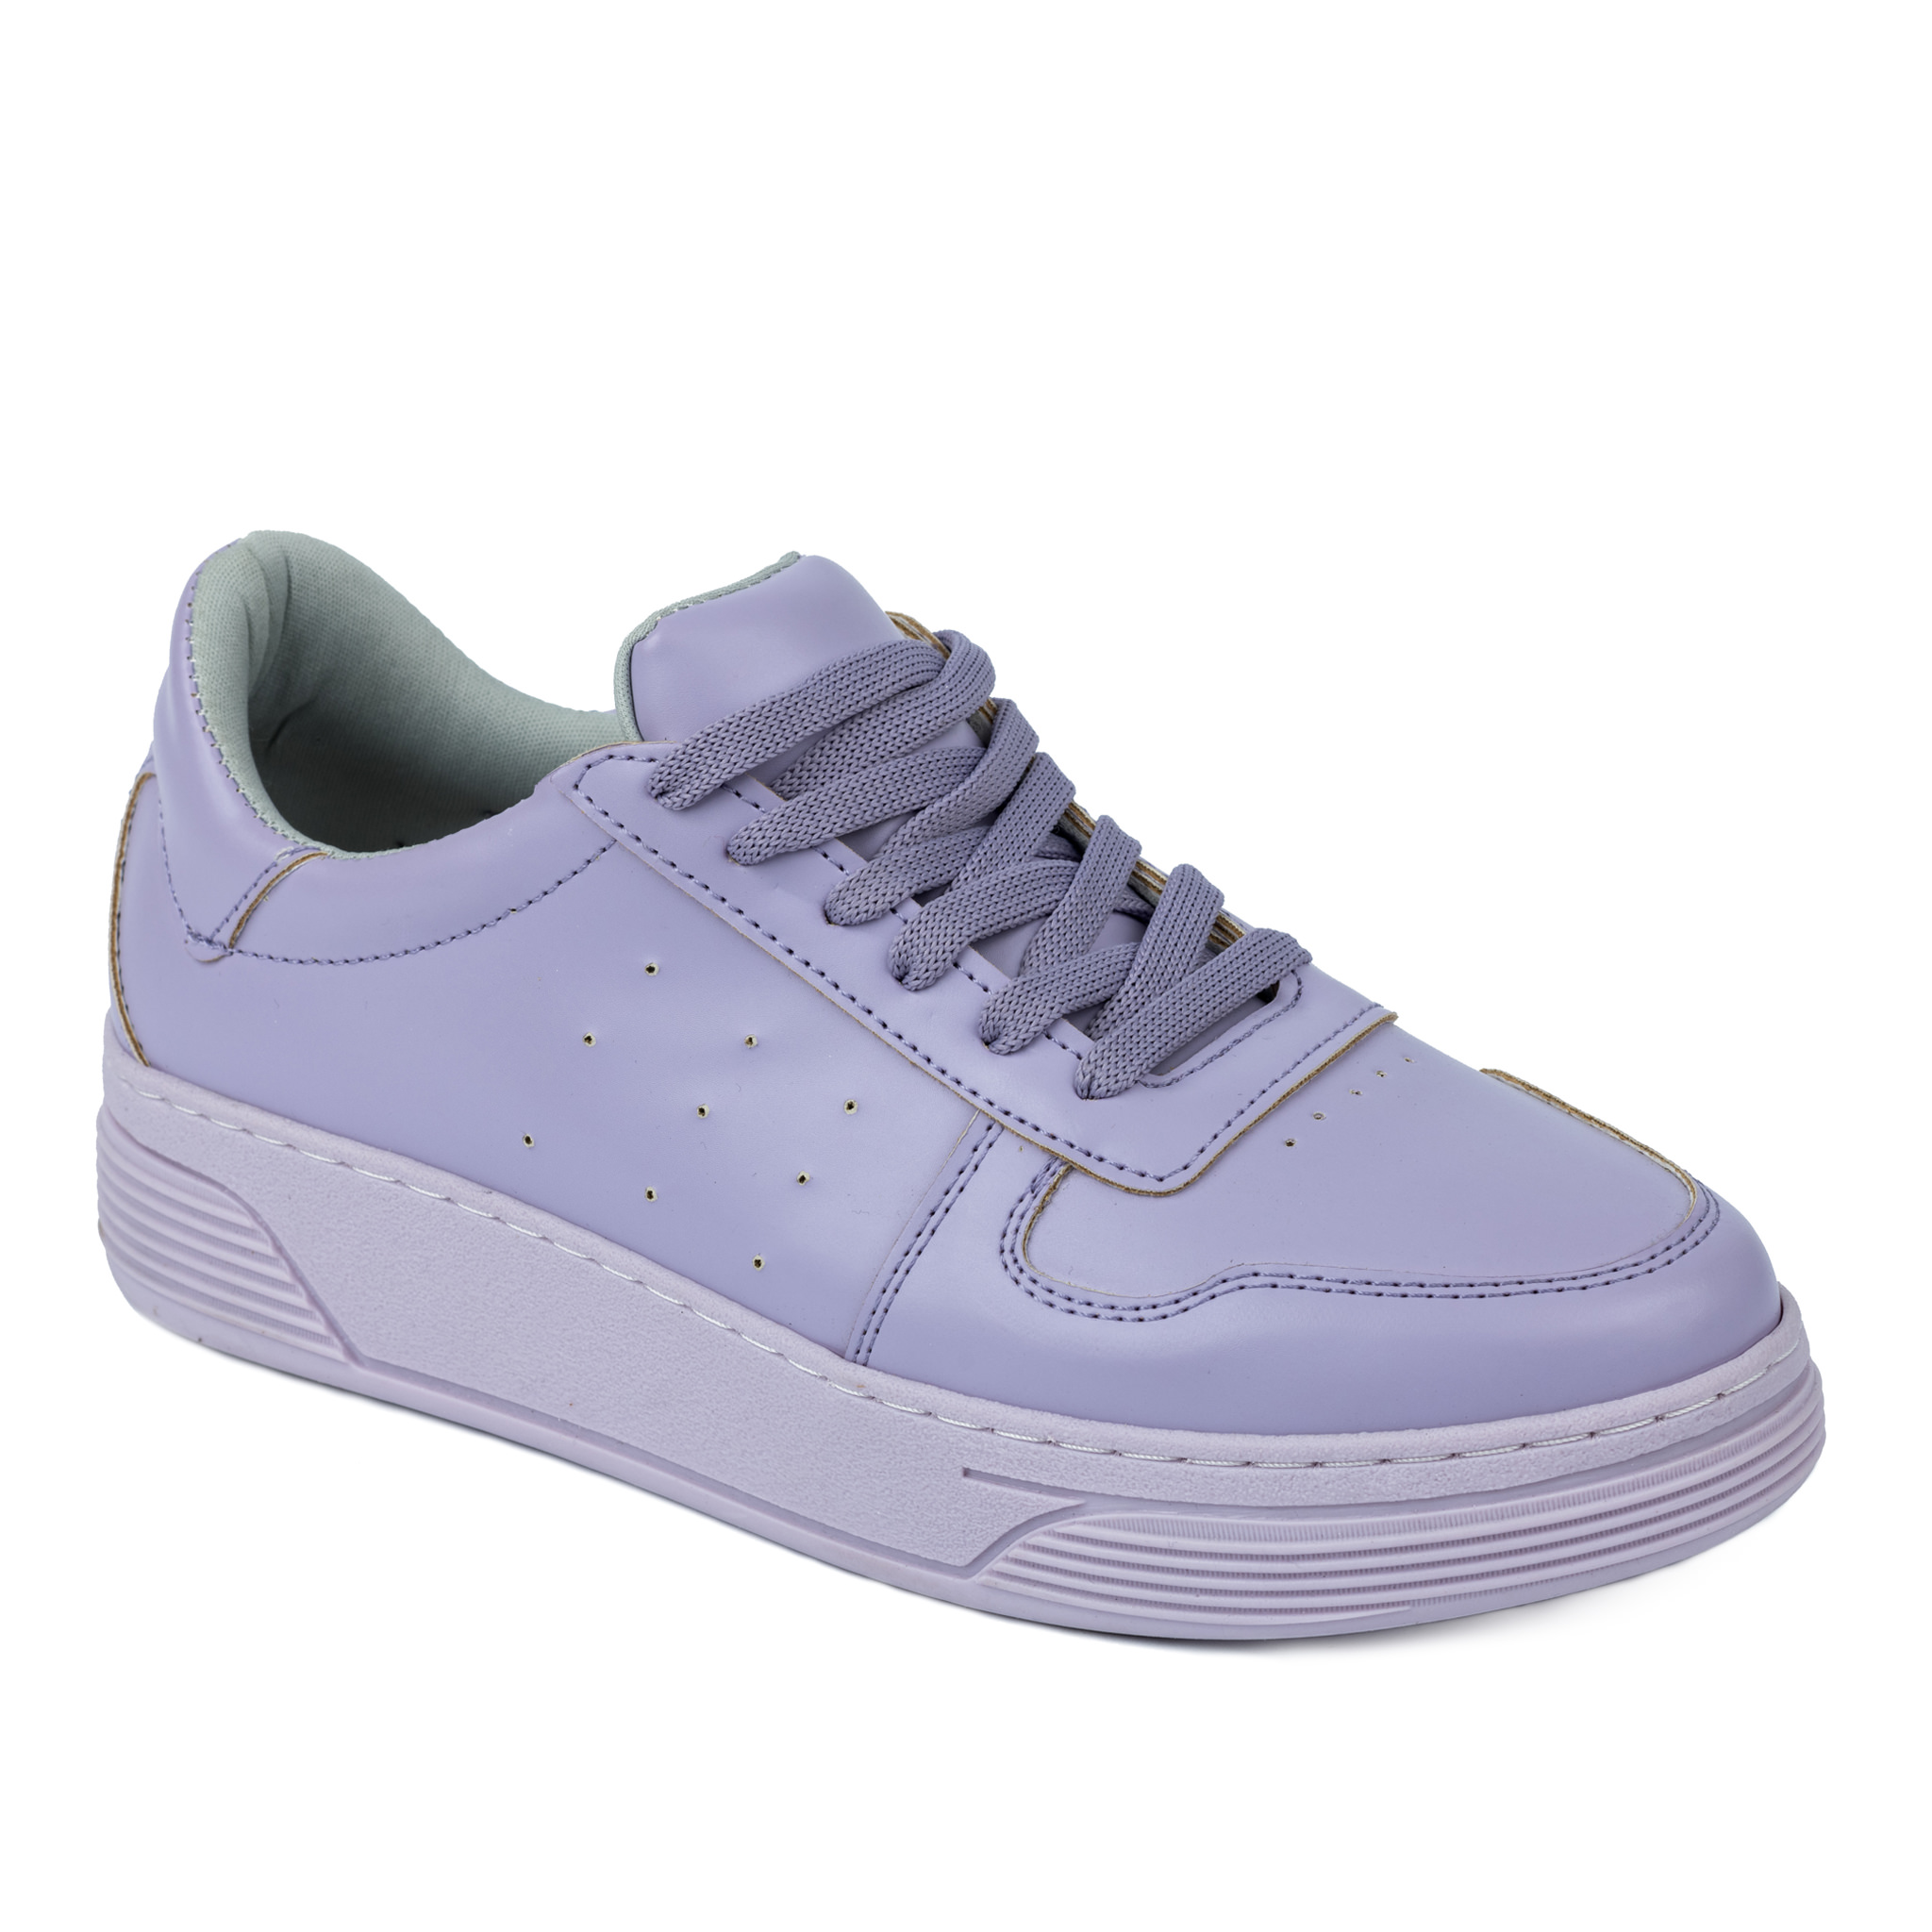 SHALLOW SNEAKERS - PURPLE